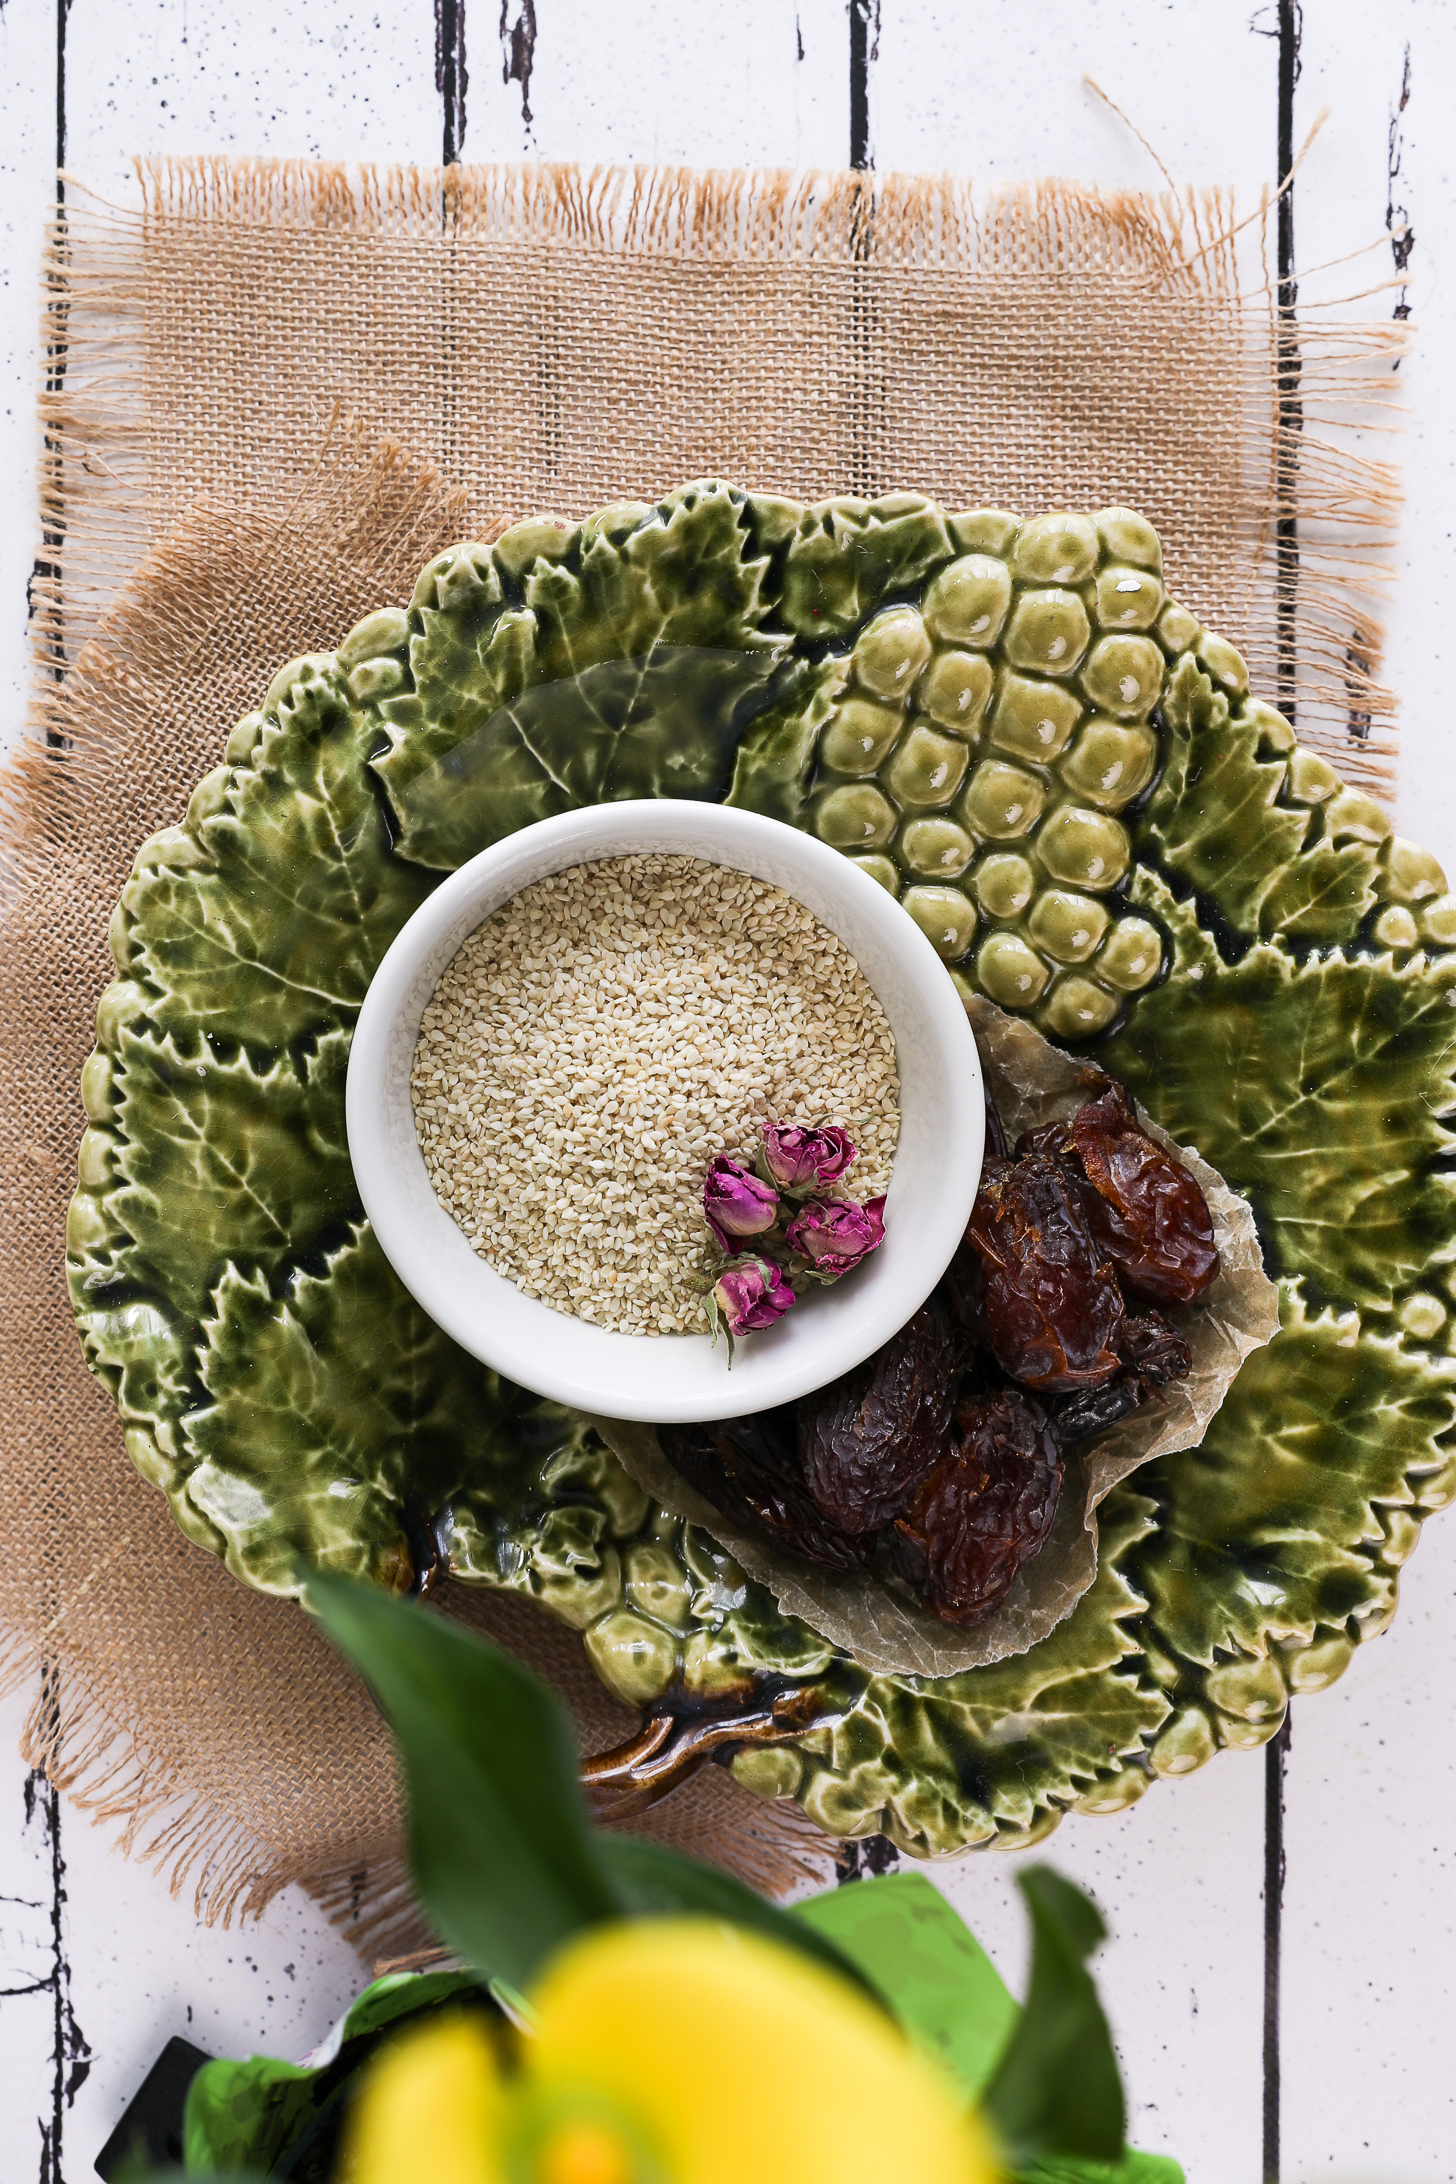 Green ceramic plate with a bowl of sesame seeds and dates on parchment paper.